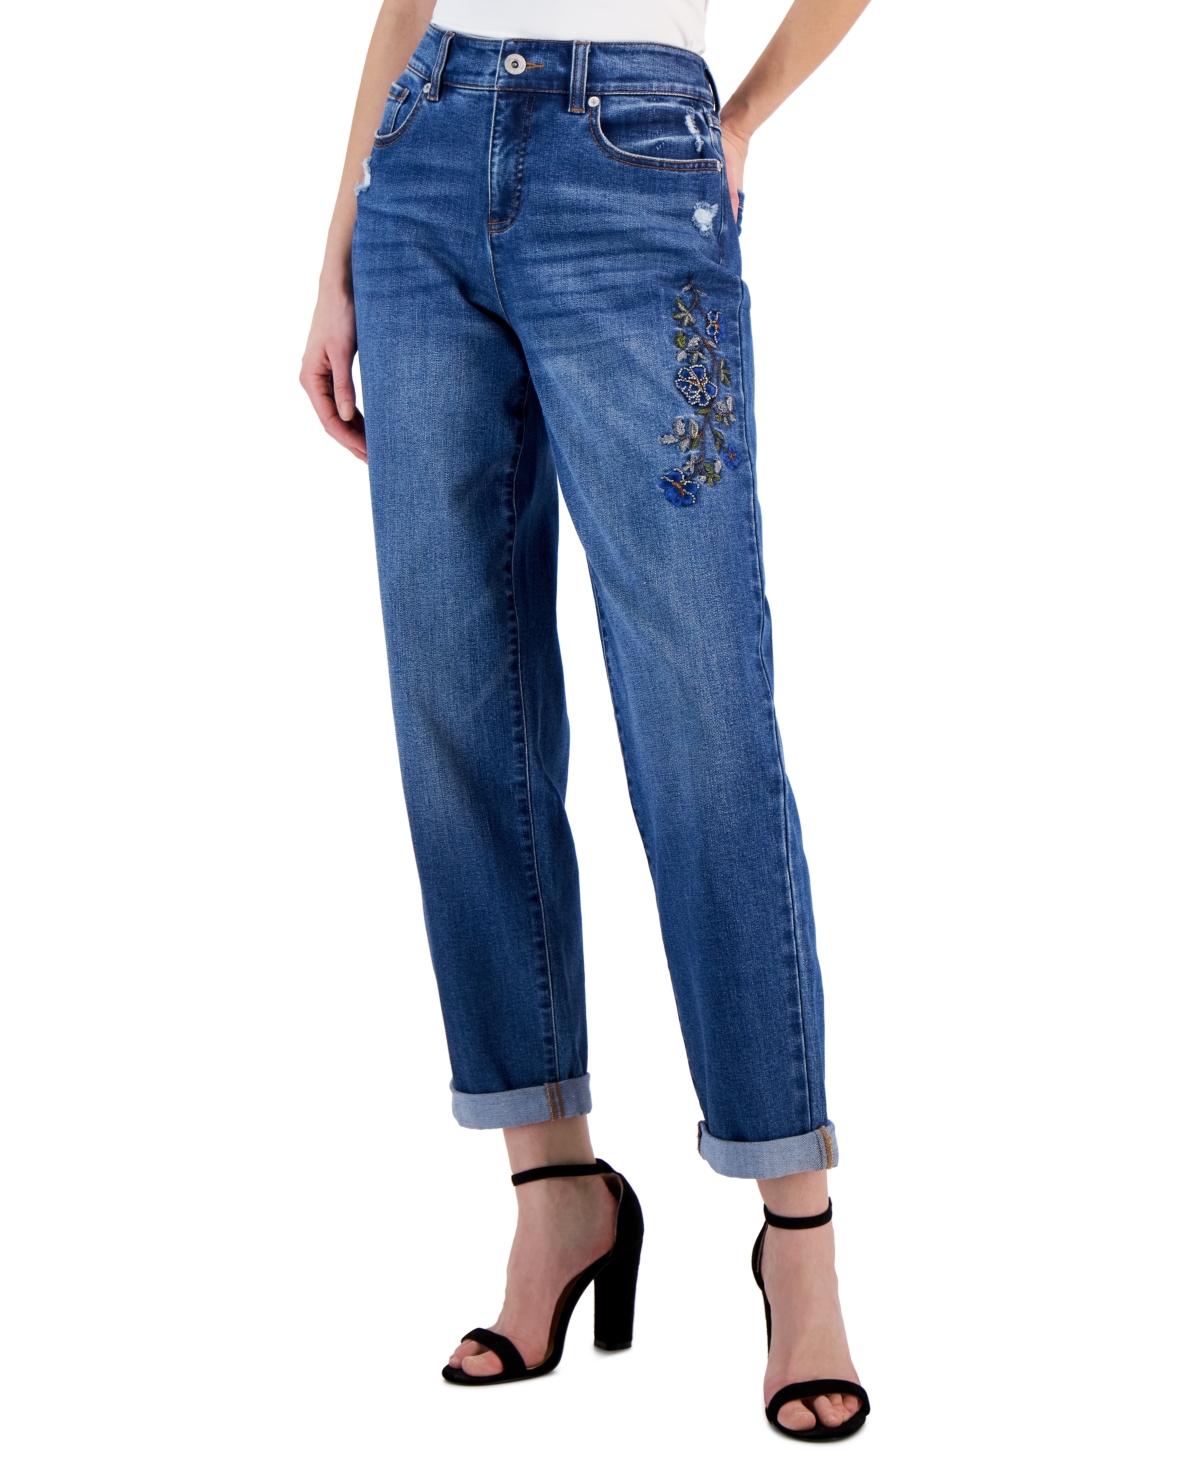  Inc International Concepts Women's High Rise Embellished Cuffed Boyfriend Jeans, Created for Macy's